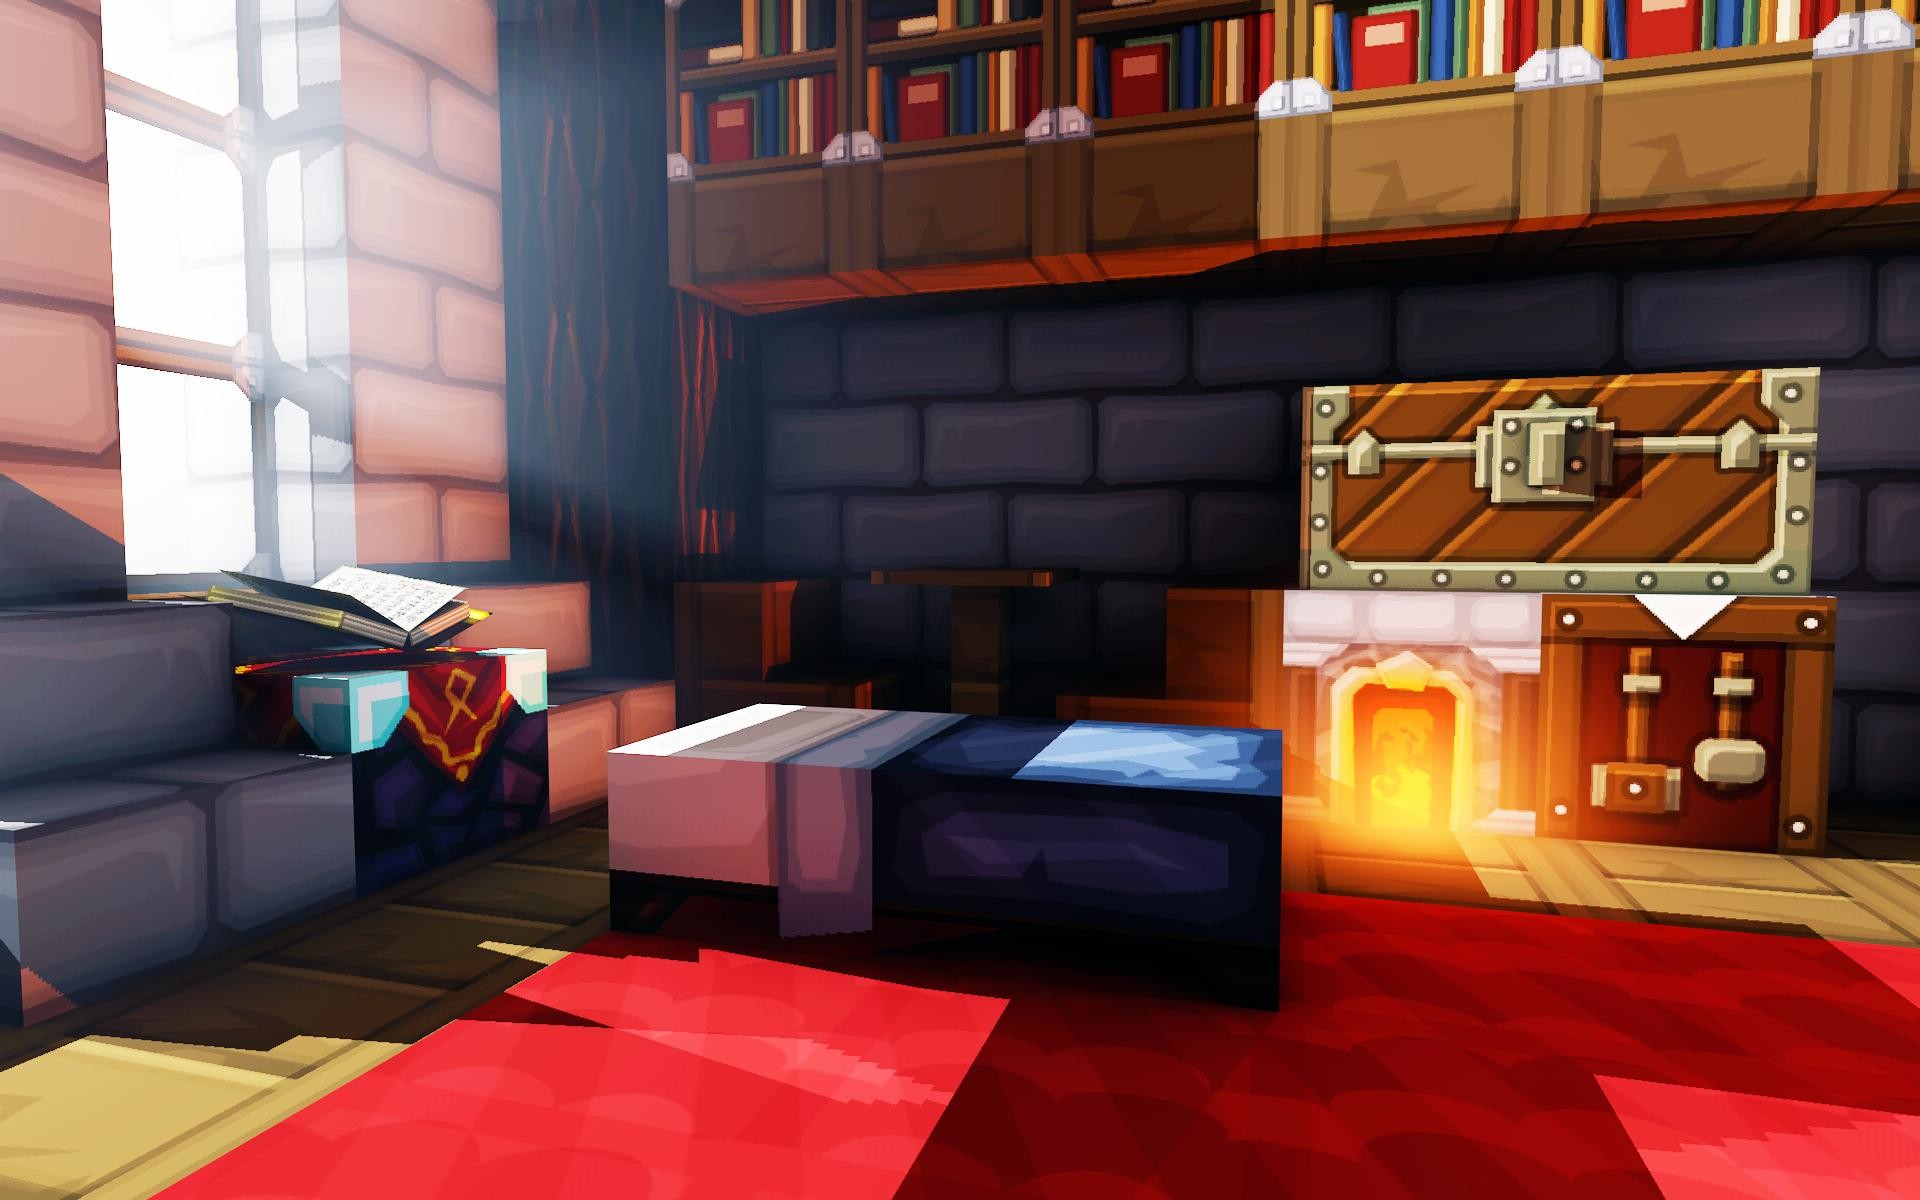 Minecraft Wallpaper For Walls 64 Pictures